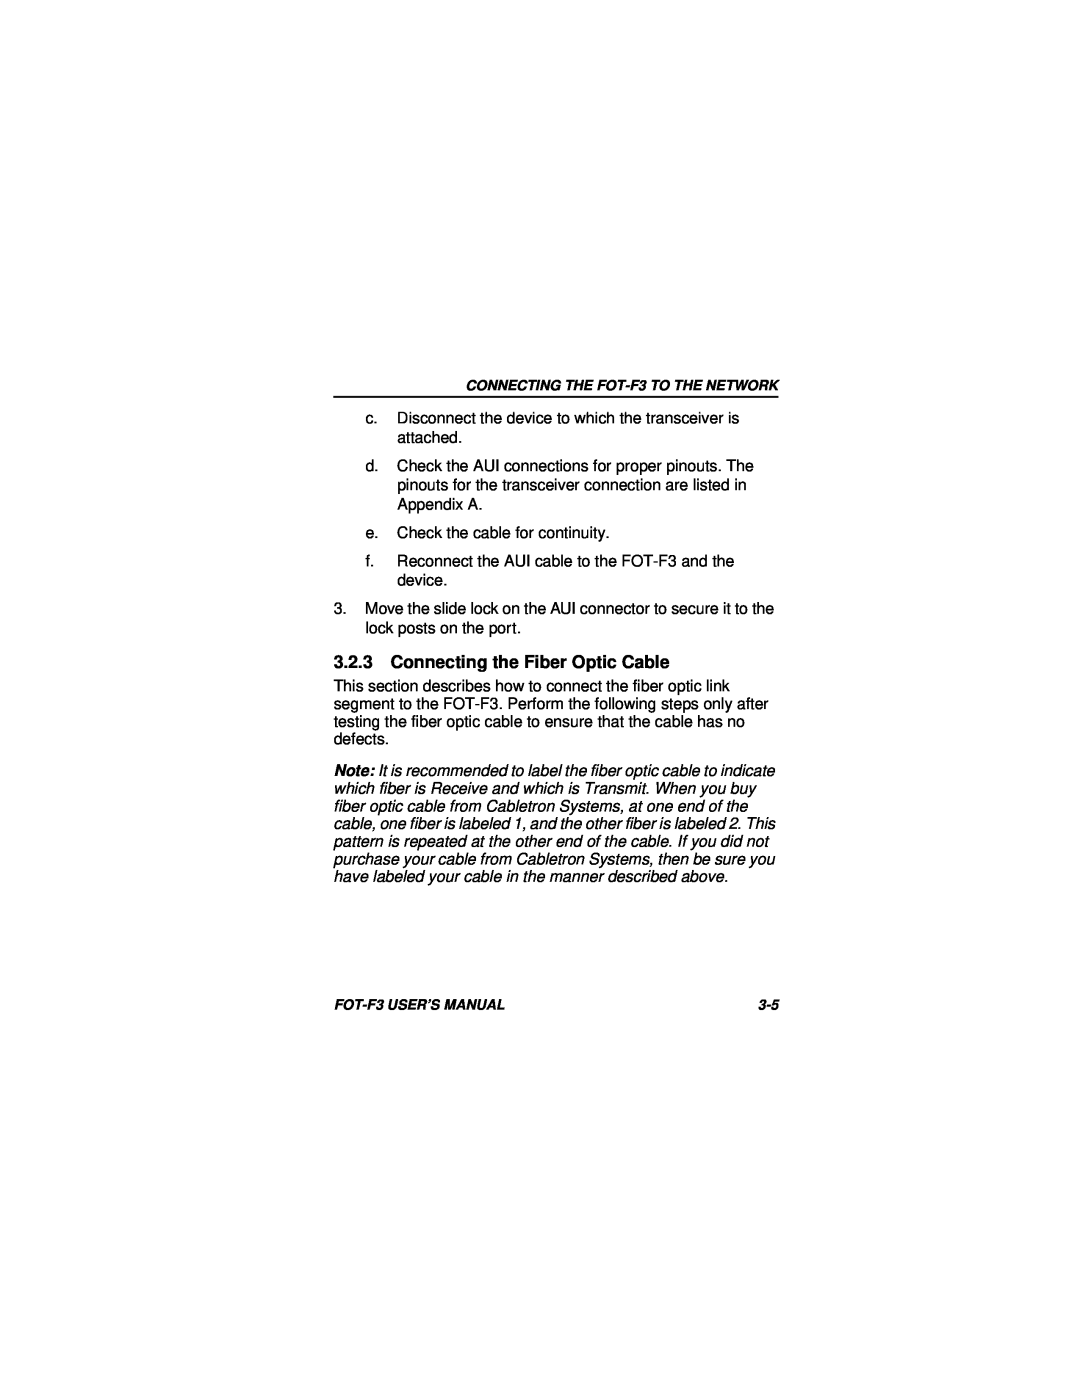 Cabletron Systems F3 user manual Connecting the Fiber Optic Cable 